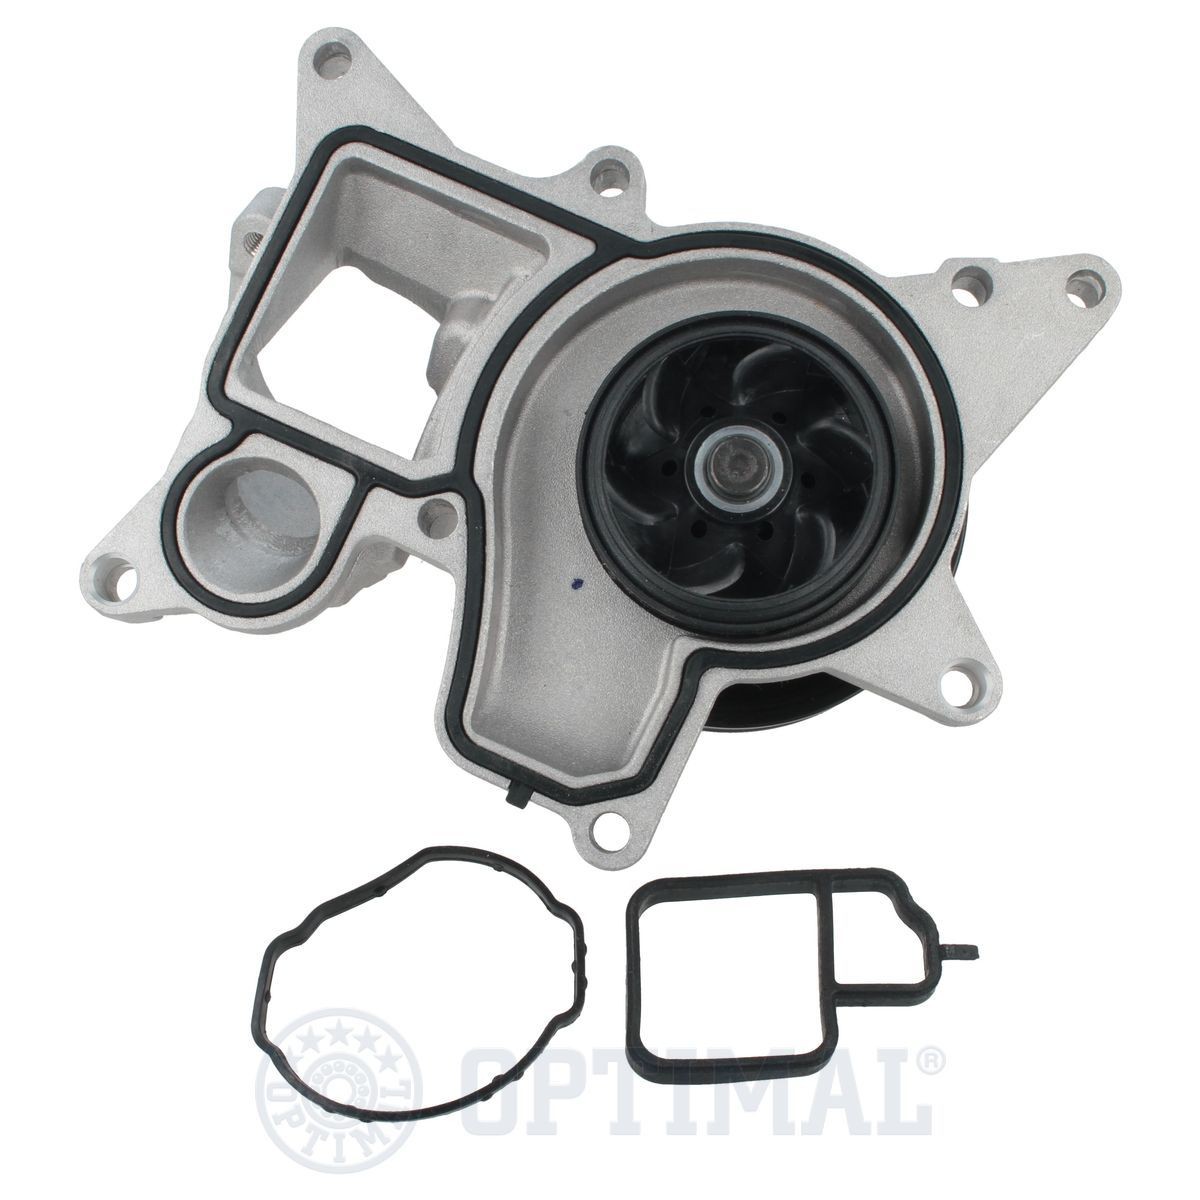 OPTIMAL Water pump for engine AQ-2387 for BMW 3 Series